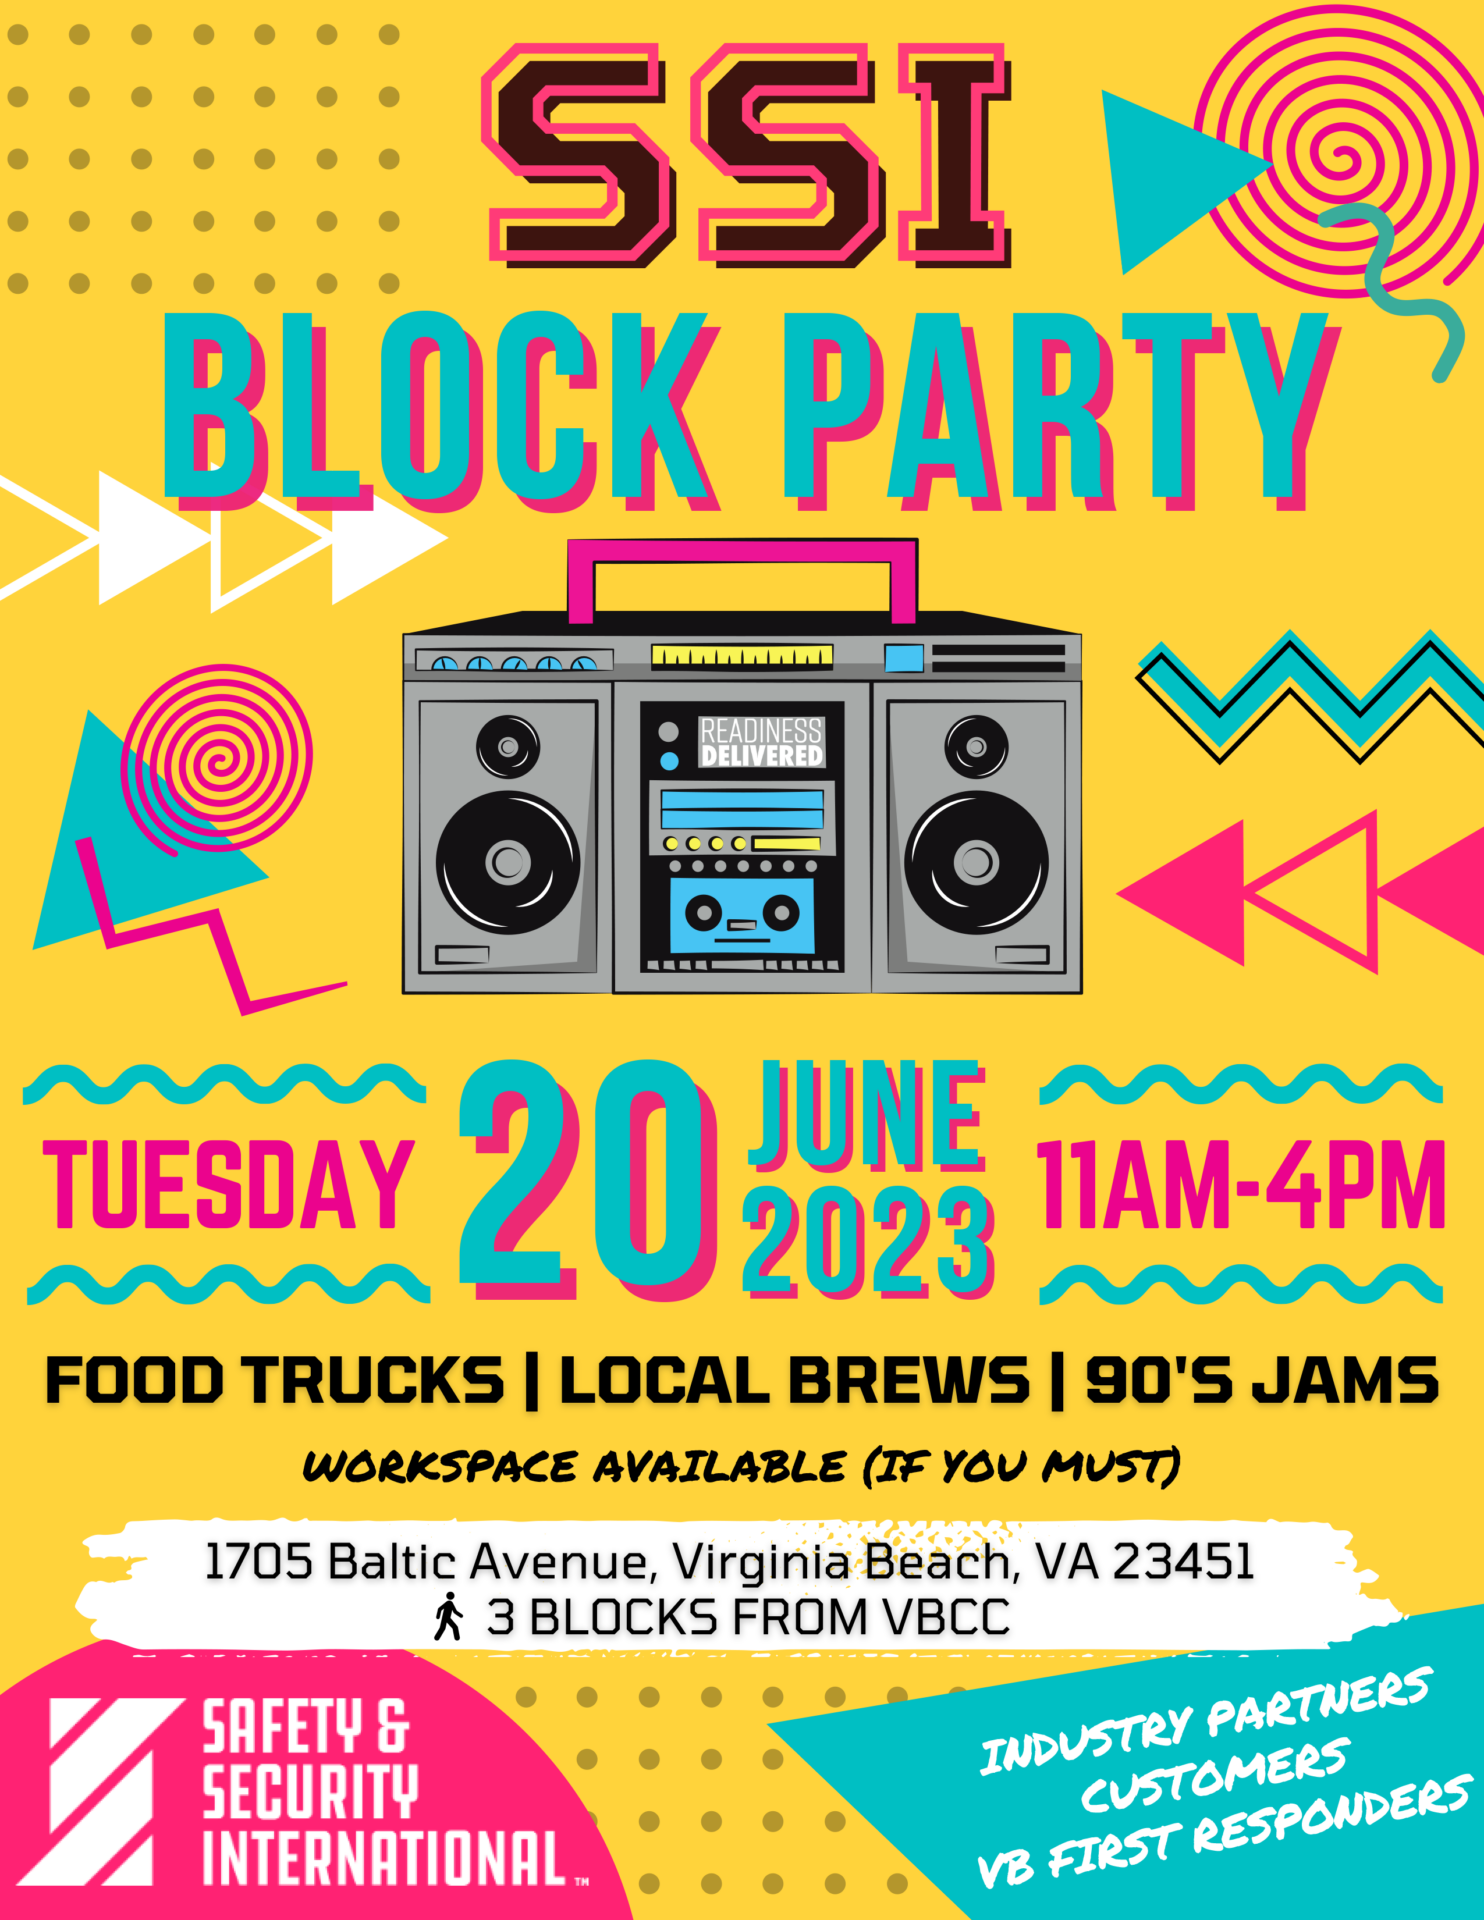 A vibrant poster announces a block party event hosted by Safety and Security International (SSI). The poster’s yellow background is adorned with pink and blue geometric shapes and lines, and a large illustration of a boombox sits in the center. The event, featuring food trucks, local brews, and 90s jams, is scheduled for Tuesday, 20 June 2023 from 11am-4pm at 1705 Baltic Avenue, Virginia Beach, VA 23451. The event welcomes industry customers and Virginia Beach first responders.